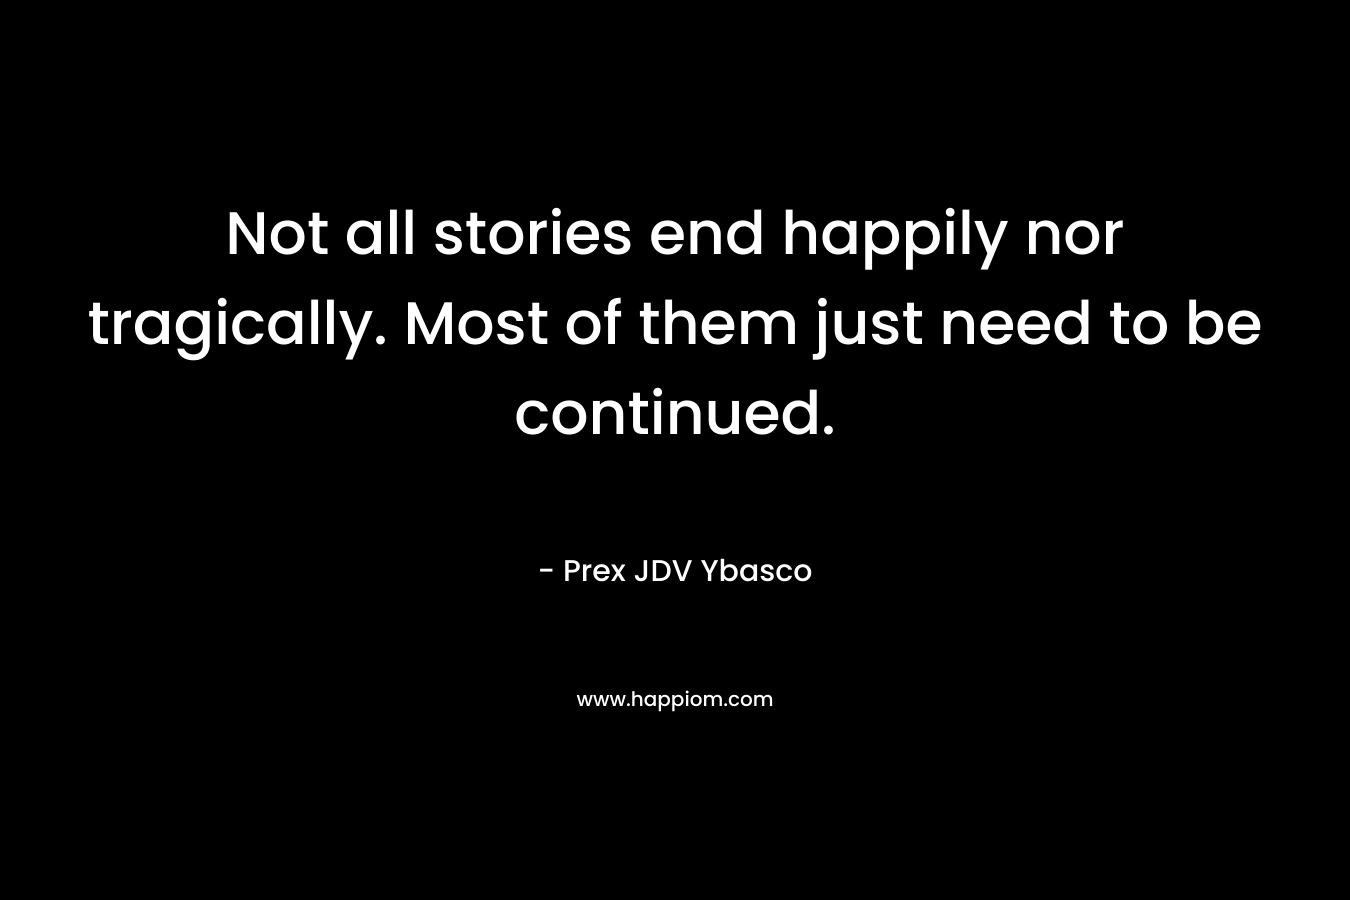 Not all stories end happily nor tragically. Most of them just need to be continued.